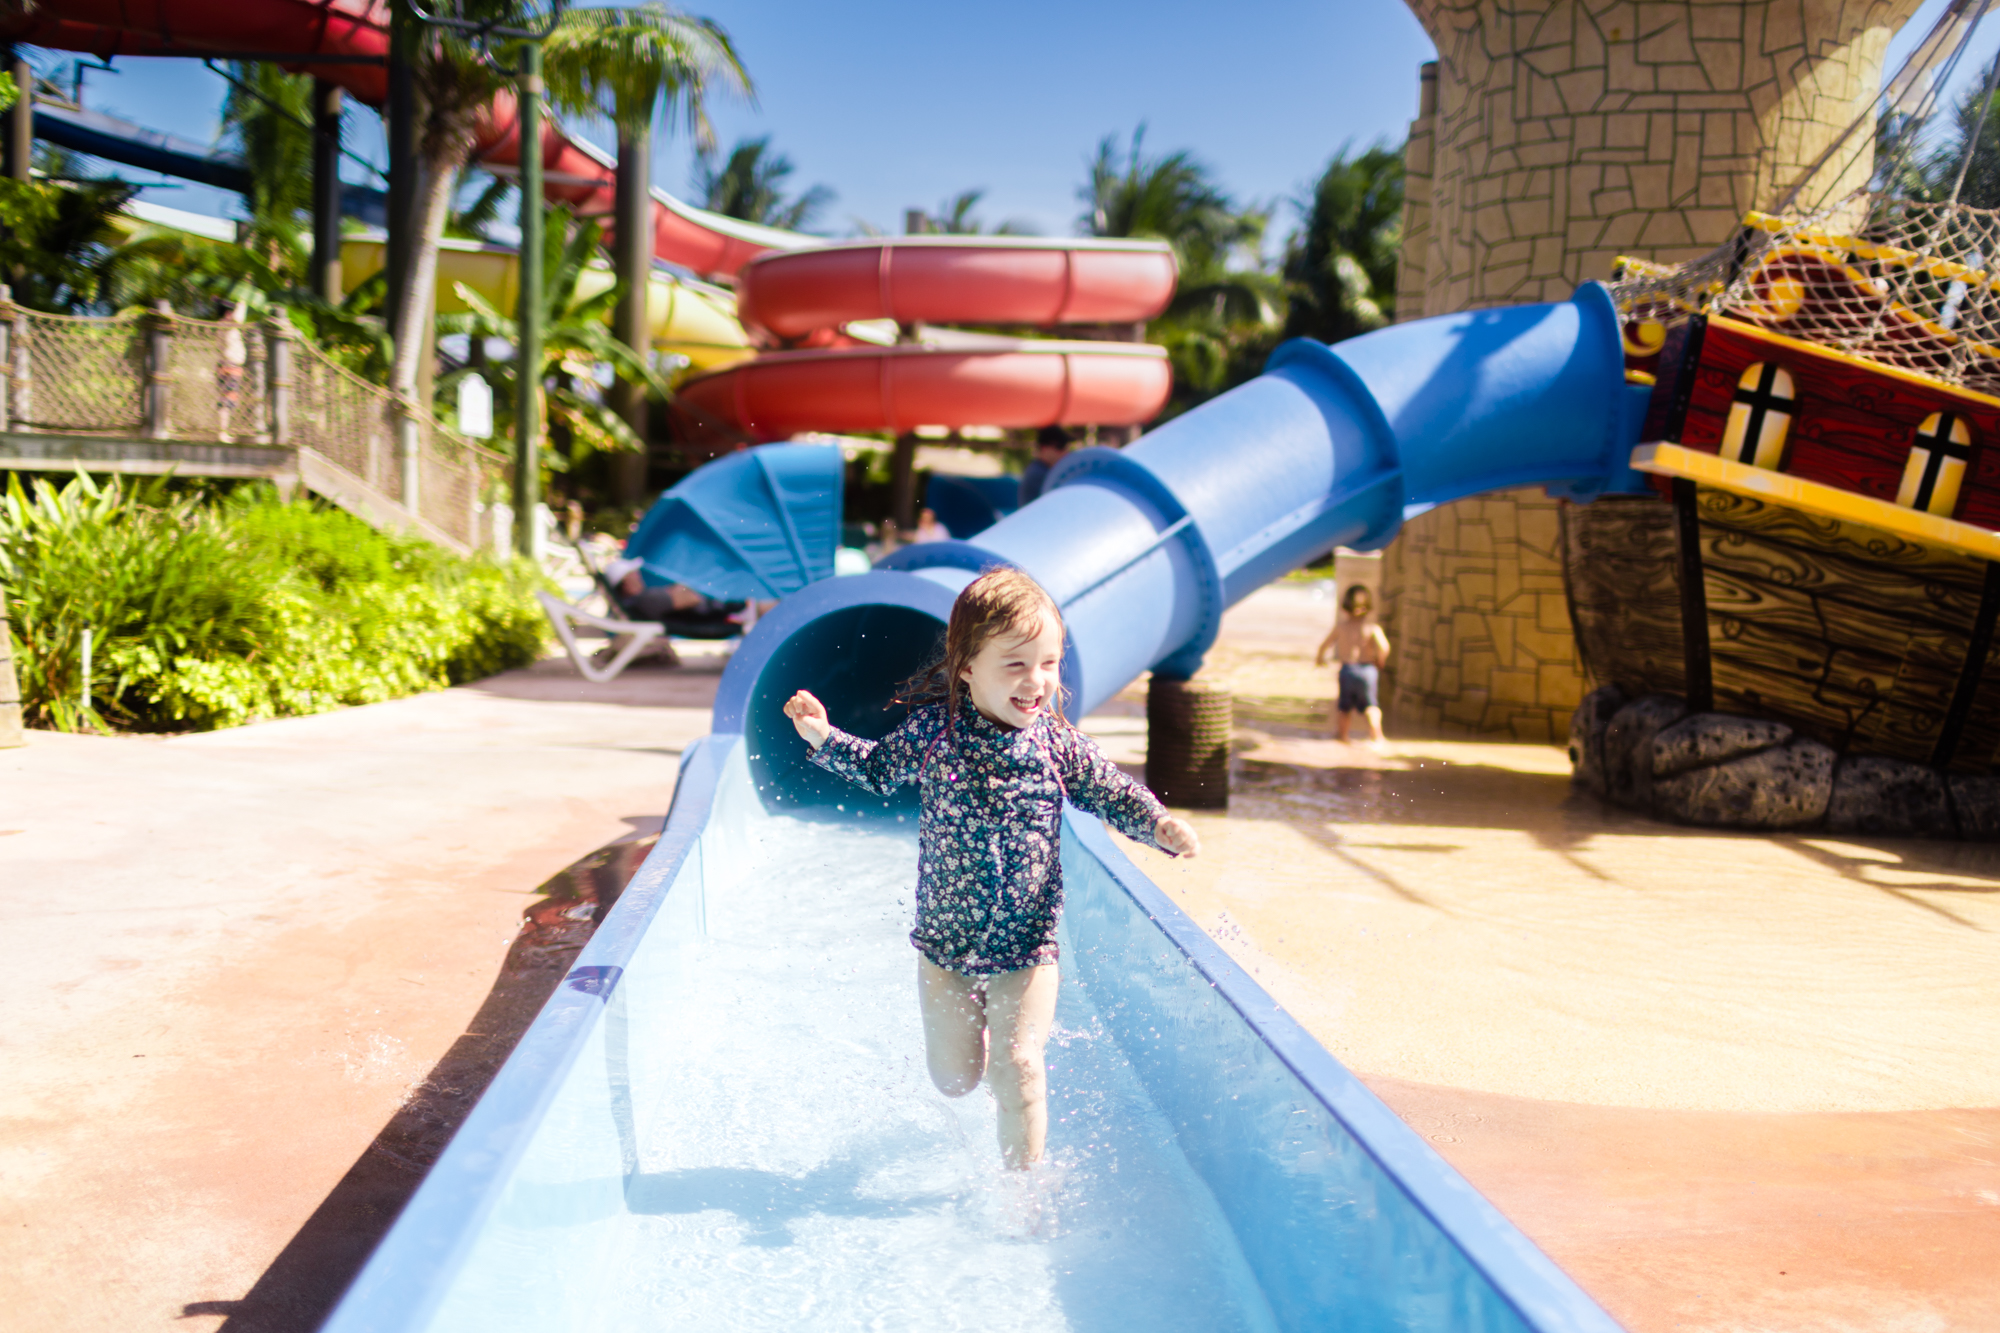 Beaches Turks and Caicos Review: Waterpark